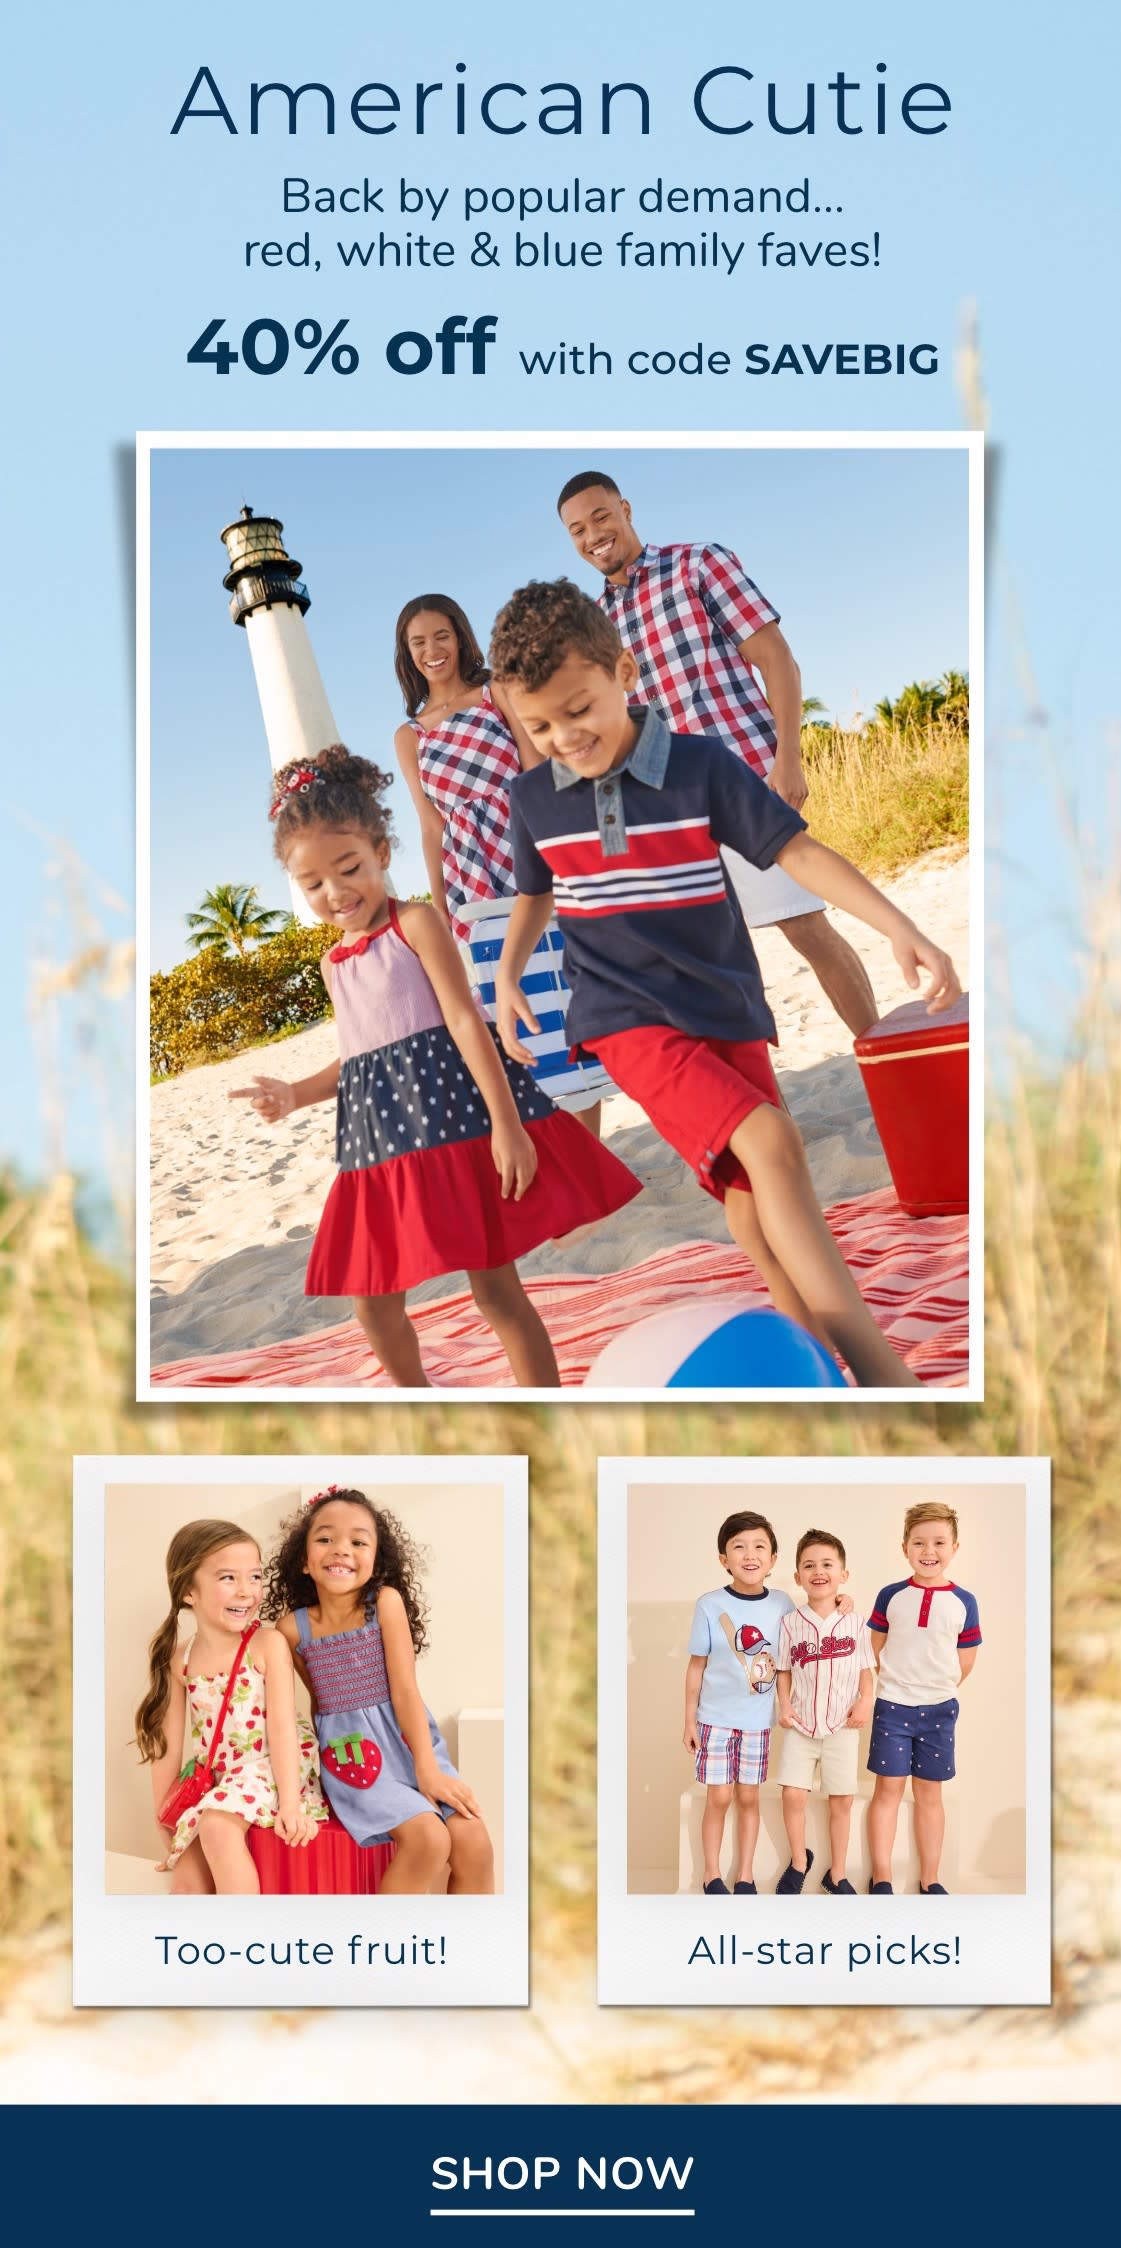 American Cutie | Your favorite red, white & blue collection - back by popular demand!